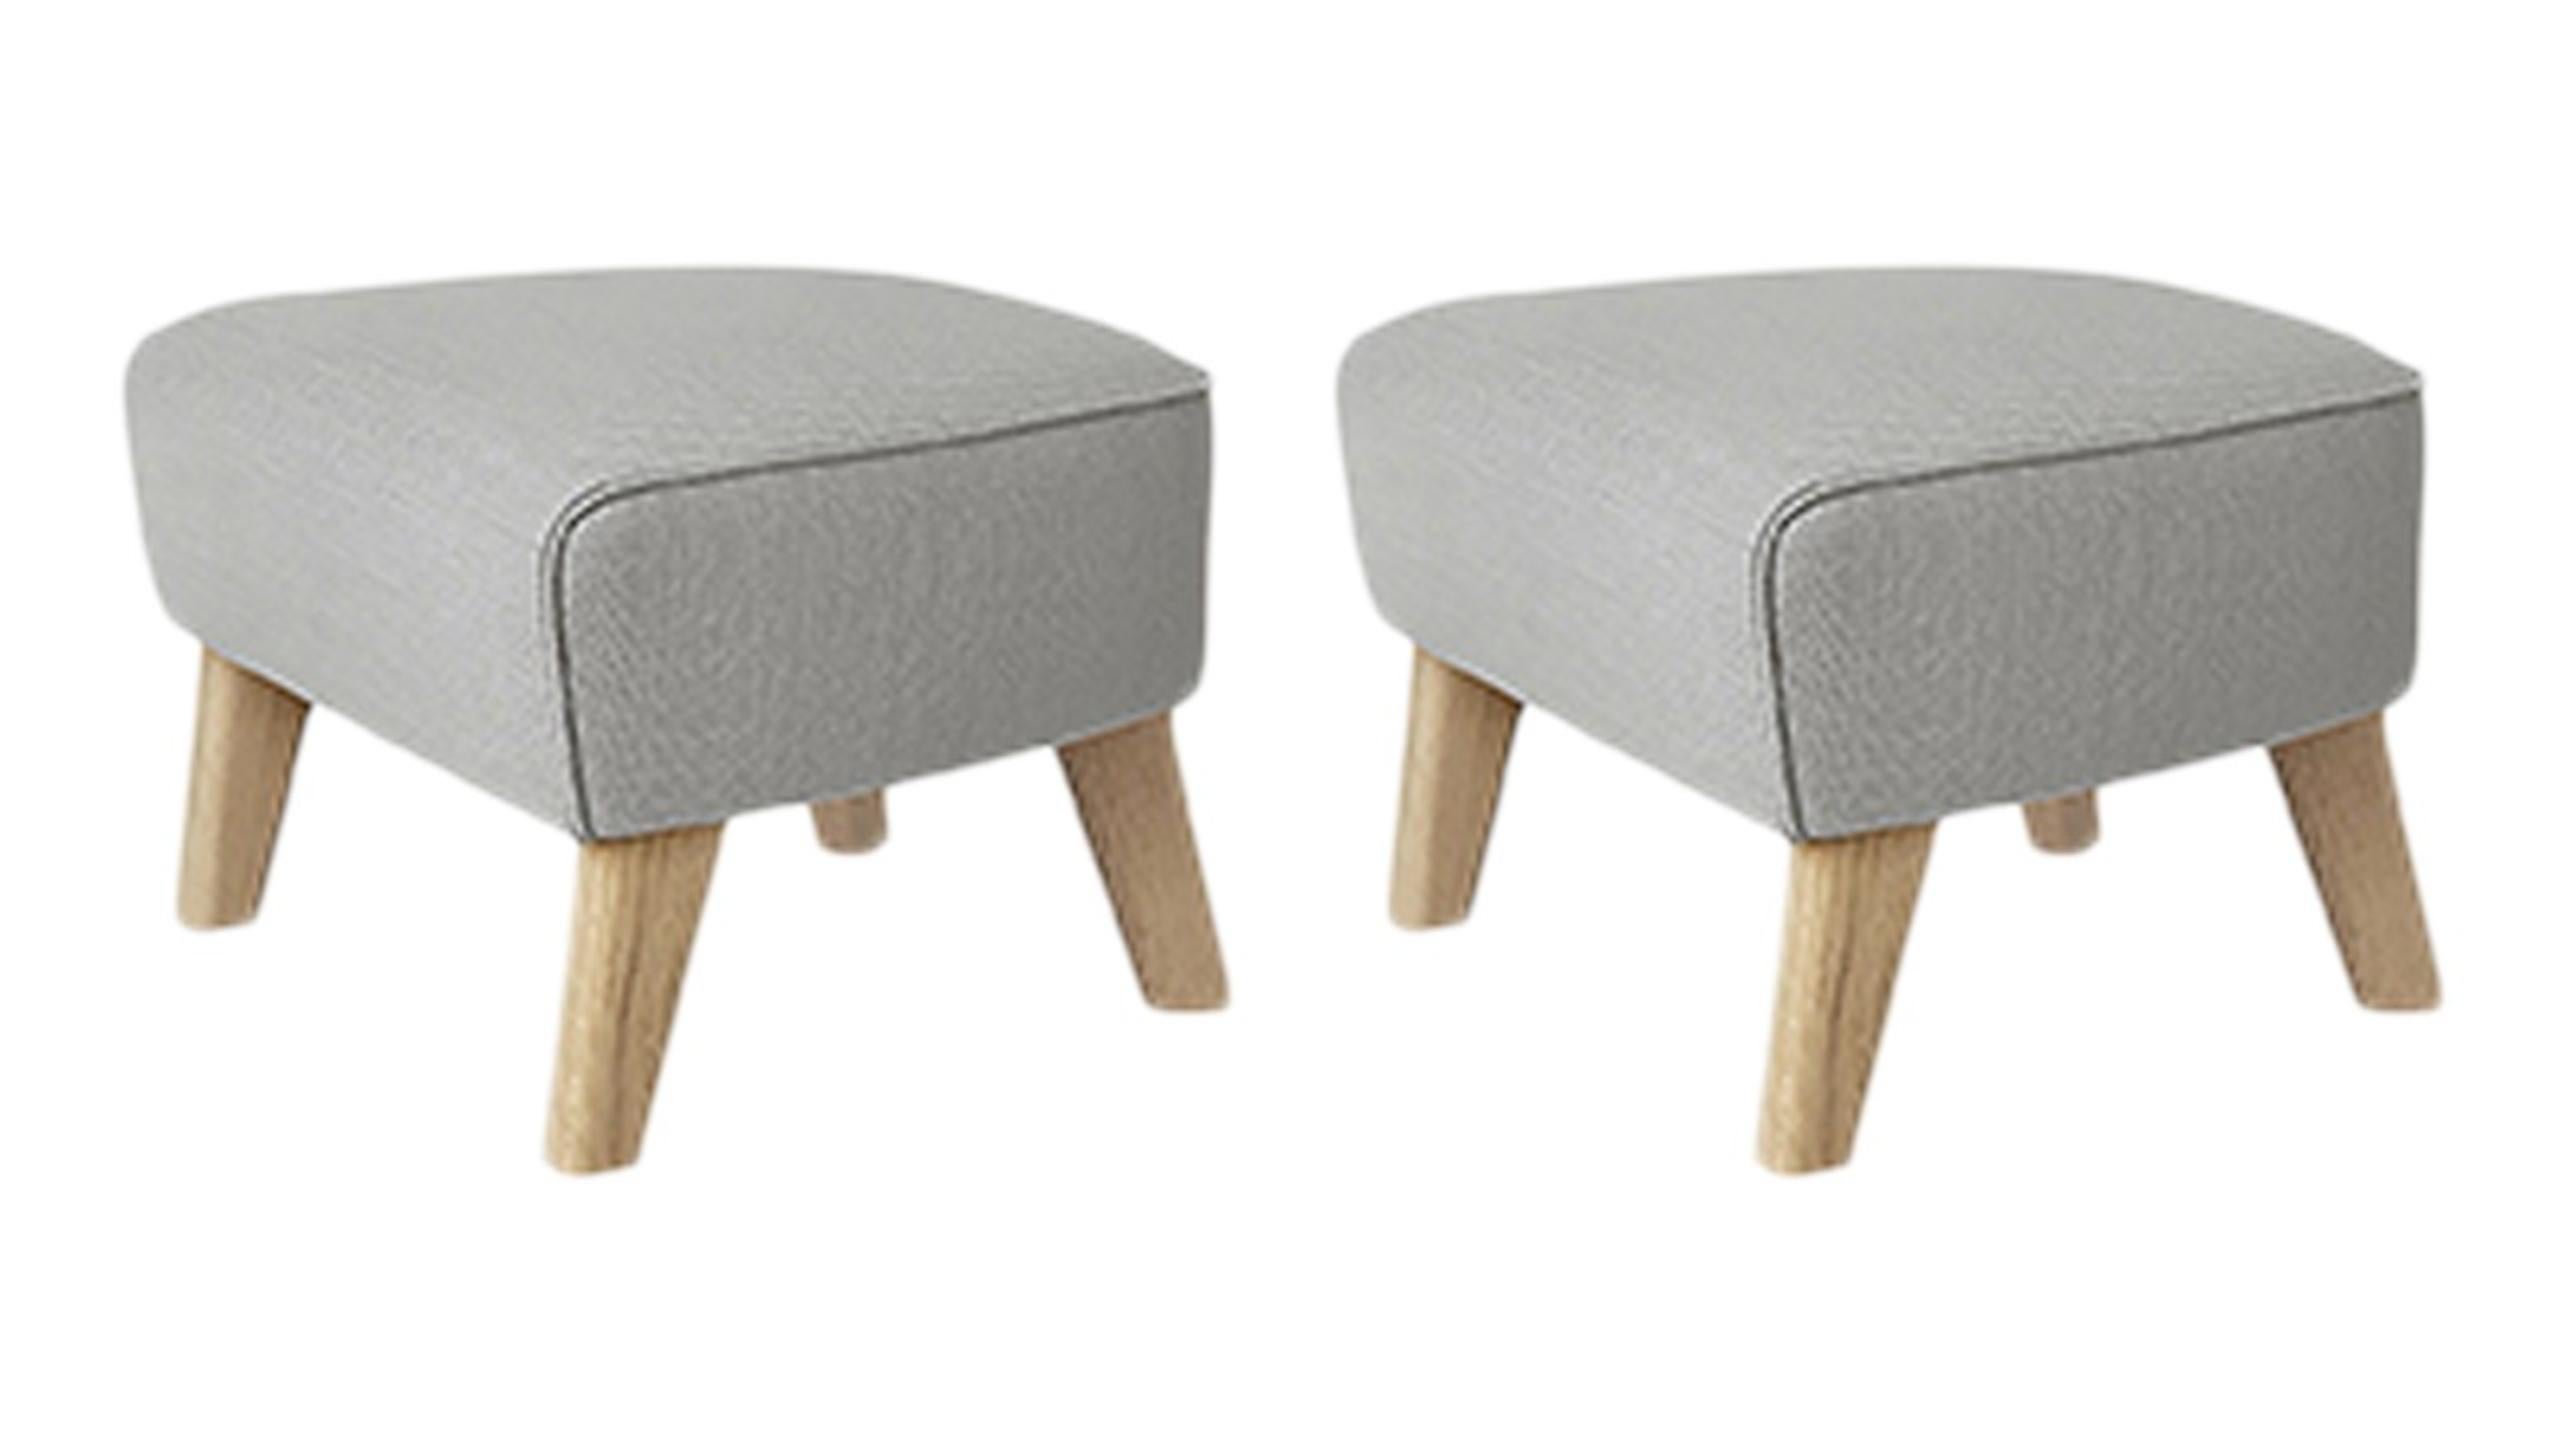 Set of 2 light grey, natural oak raf simons vidar 3 my own chair footstool by Lassen.
Dimensions: W 56 x D 58 x H 40 cm 
Materials: Textile
Also Available: Other colors available.

The My Own Chair Footstool has been designed in the same spirit